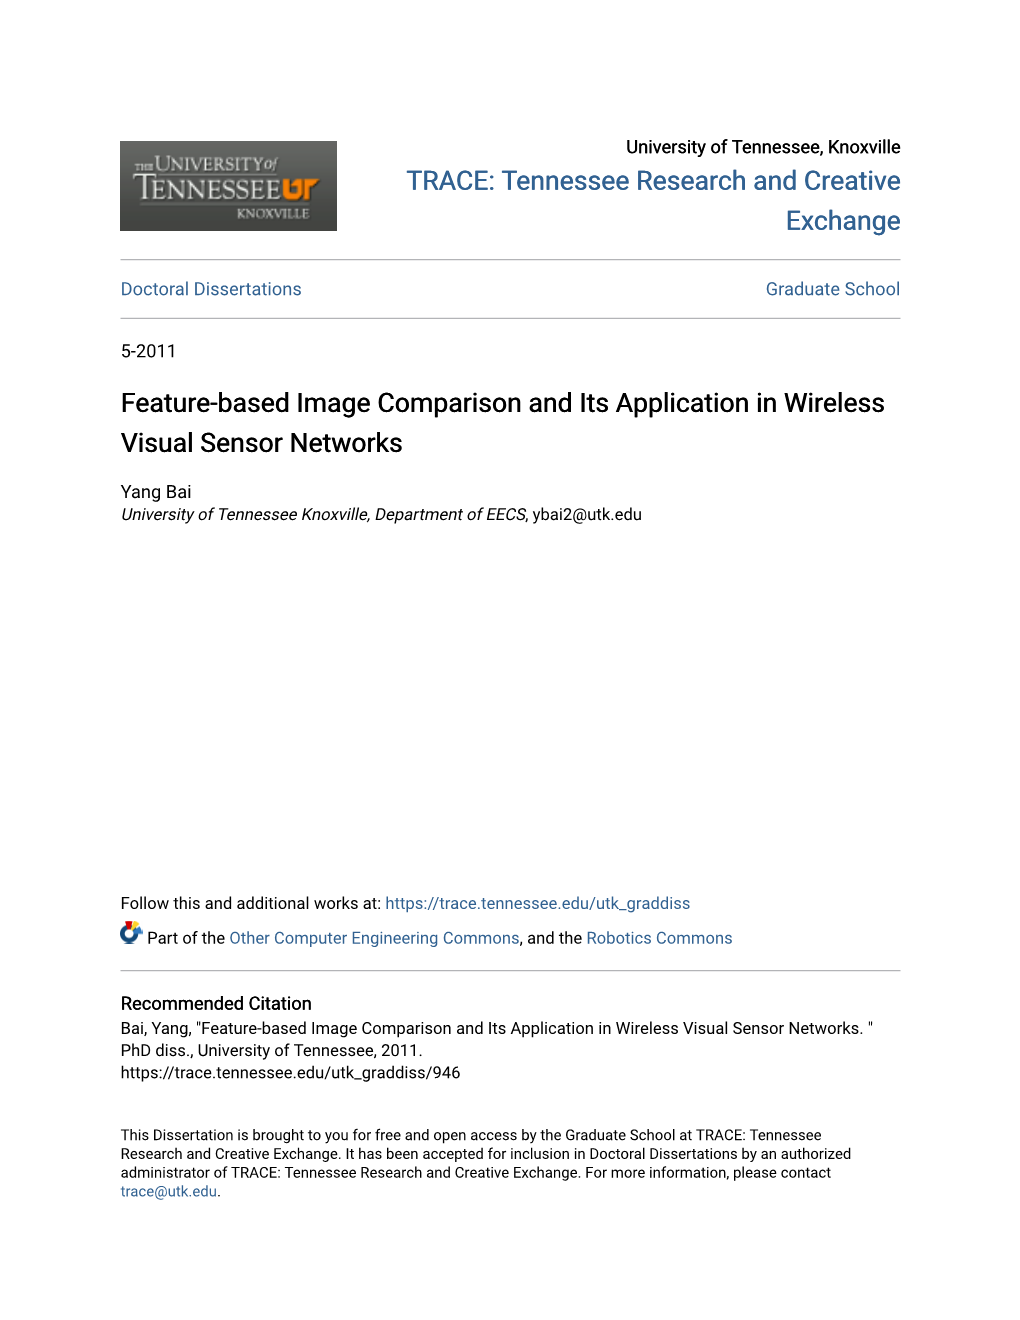 Feature-Based Image Comparison and Its Application in Wireless Visual Sensor Networks